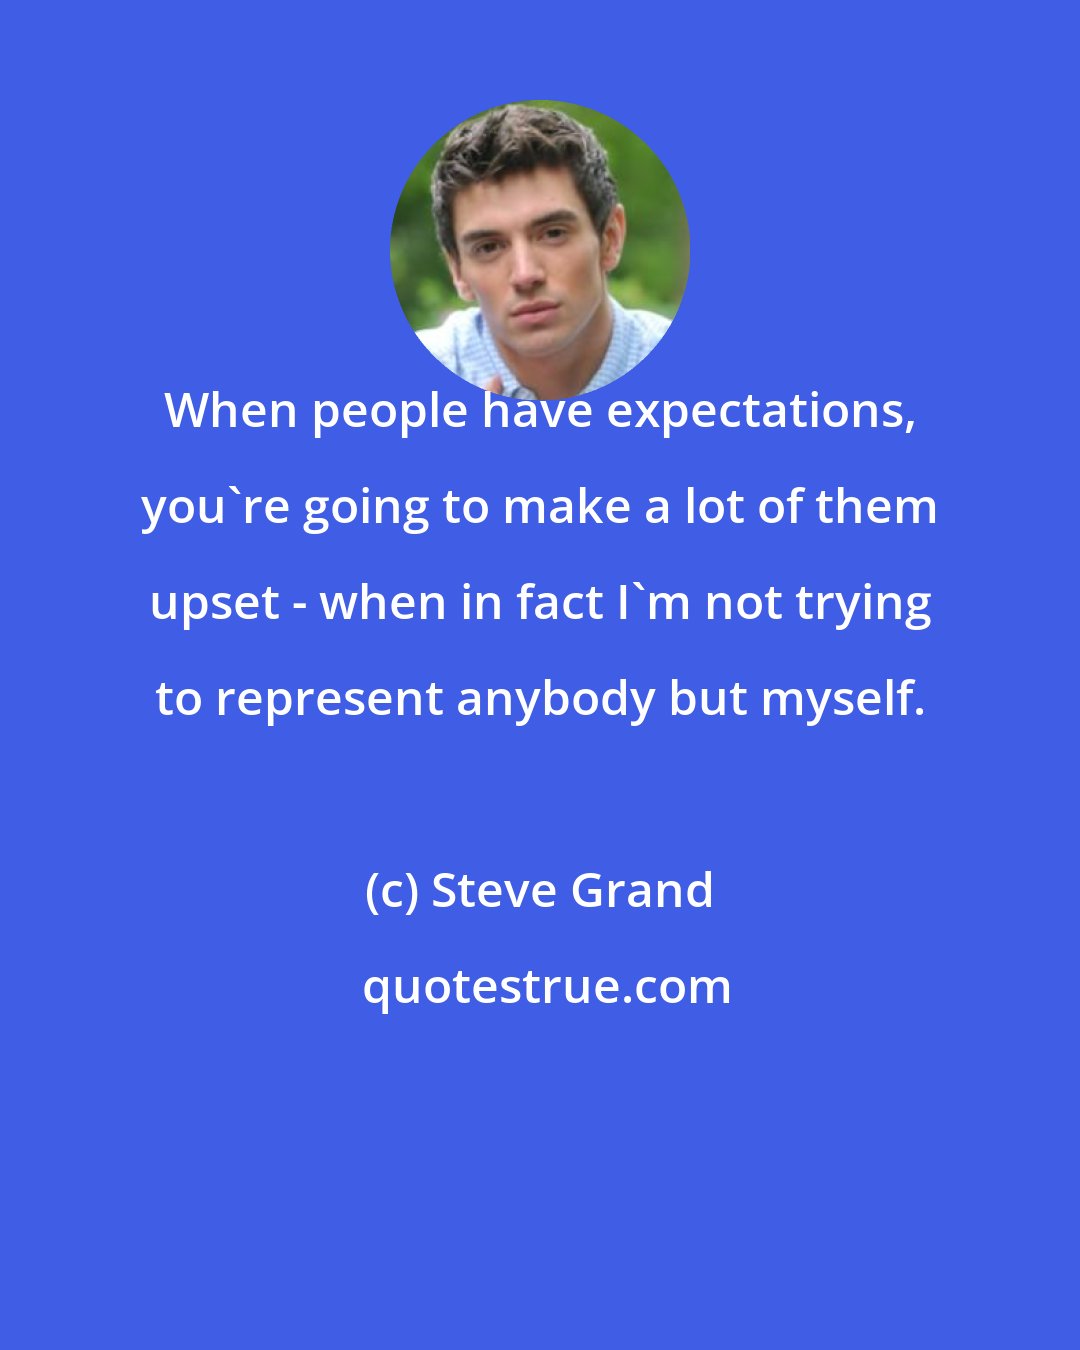 Steve Grand: When people have expectations, you're going to make a lot of them upset - when in fact I'm not trying to represent anybody but myself.